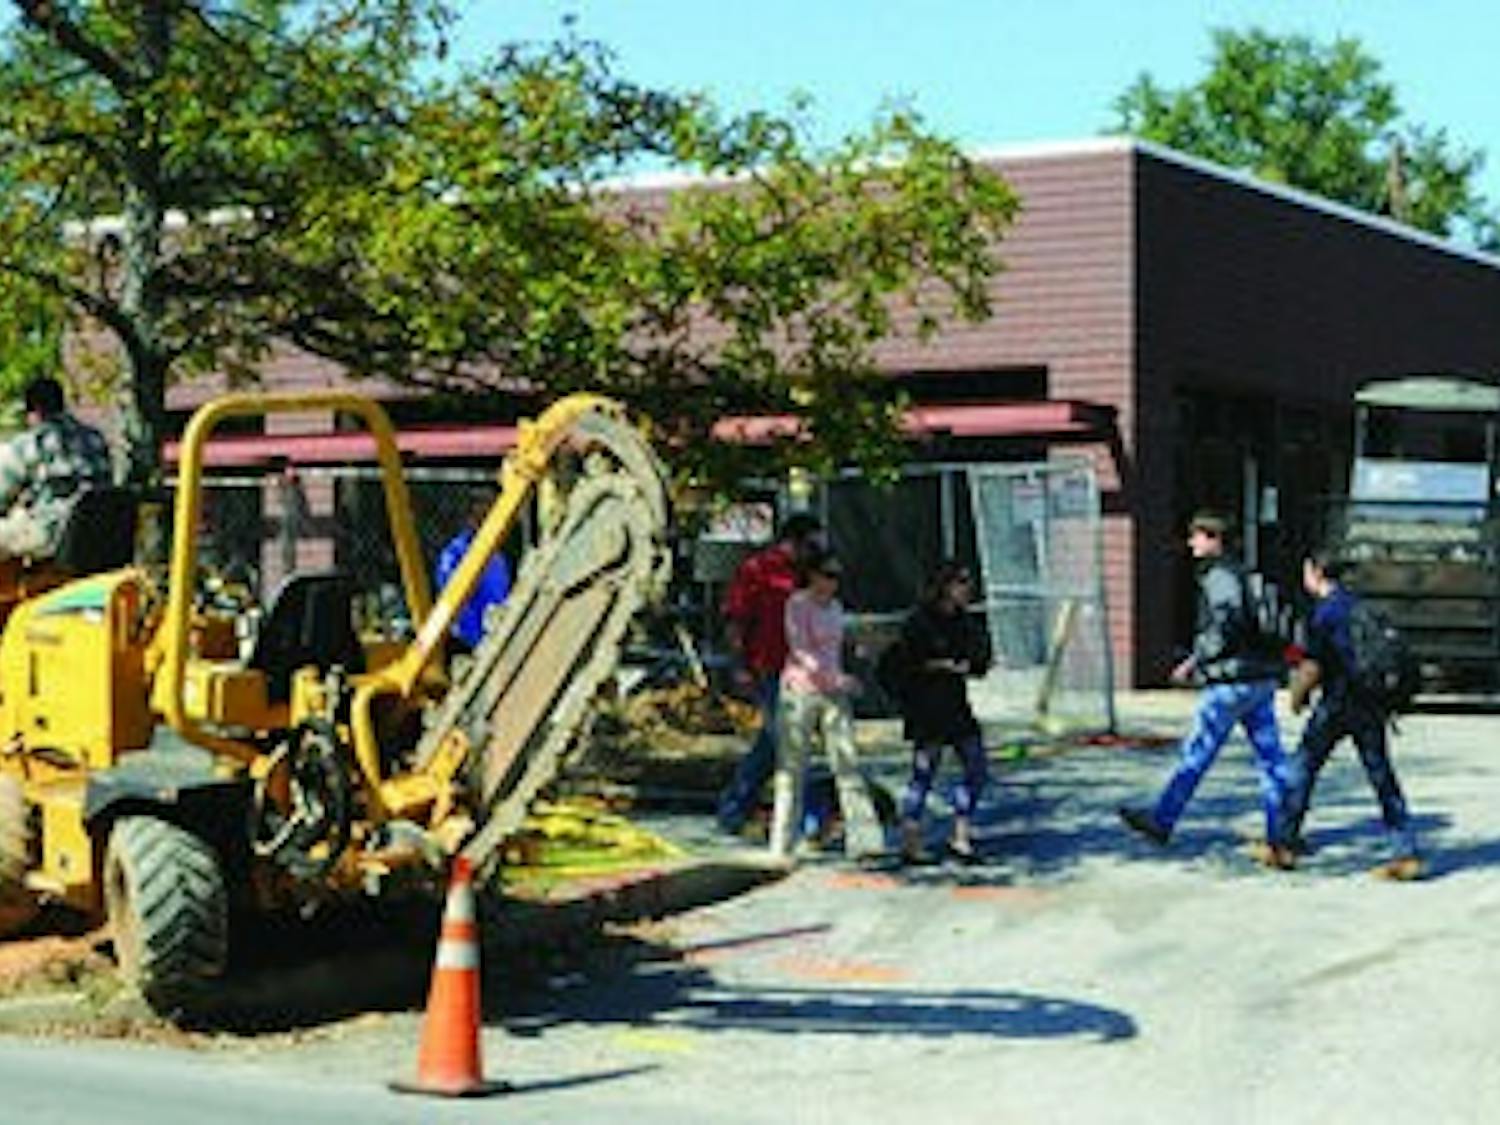 Downtown construction will culminate in two new restaurants this winter: Tropical Smoothie on West Glenn Avenue and Chipotle Mexican Grill (above) on West Magnolia Avenue. (Christen Harned / ASSISTANT PHOTO EDITOR)